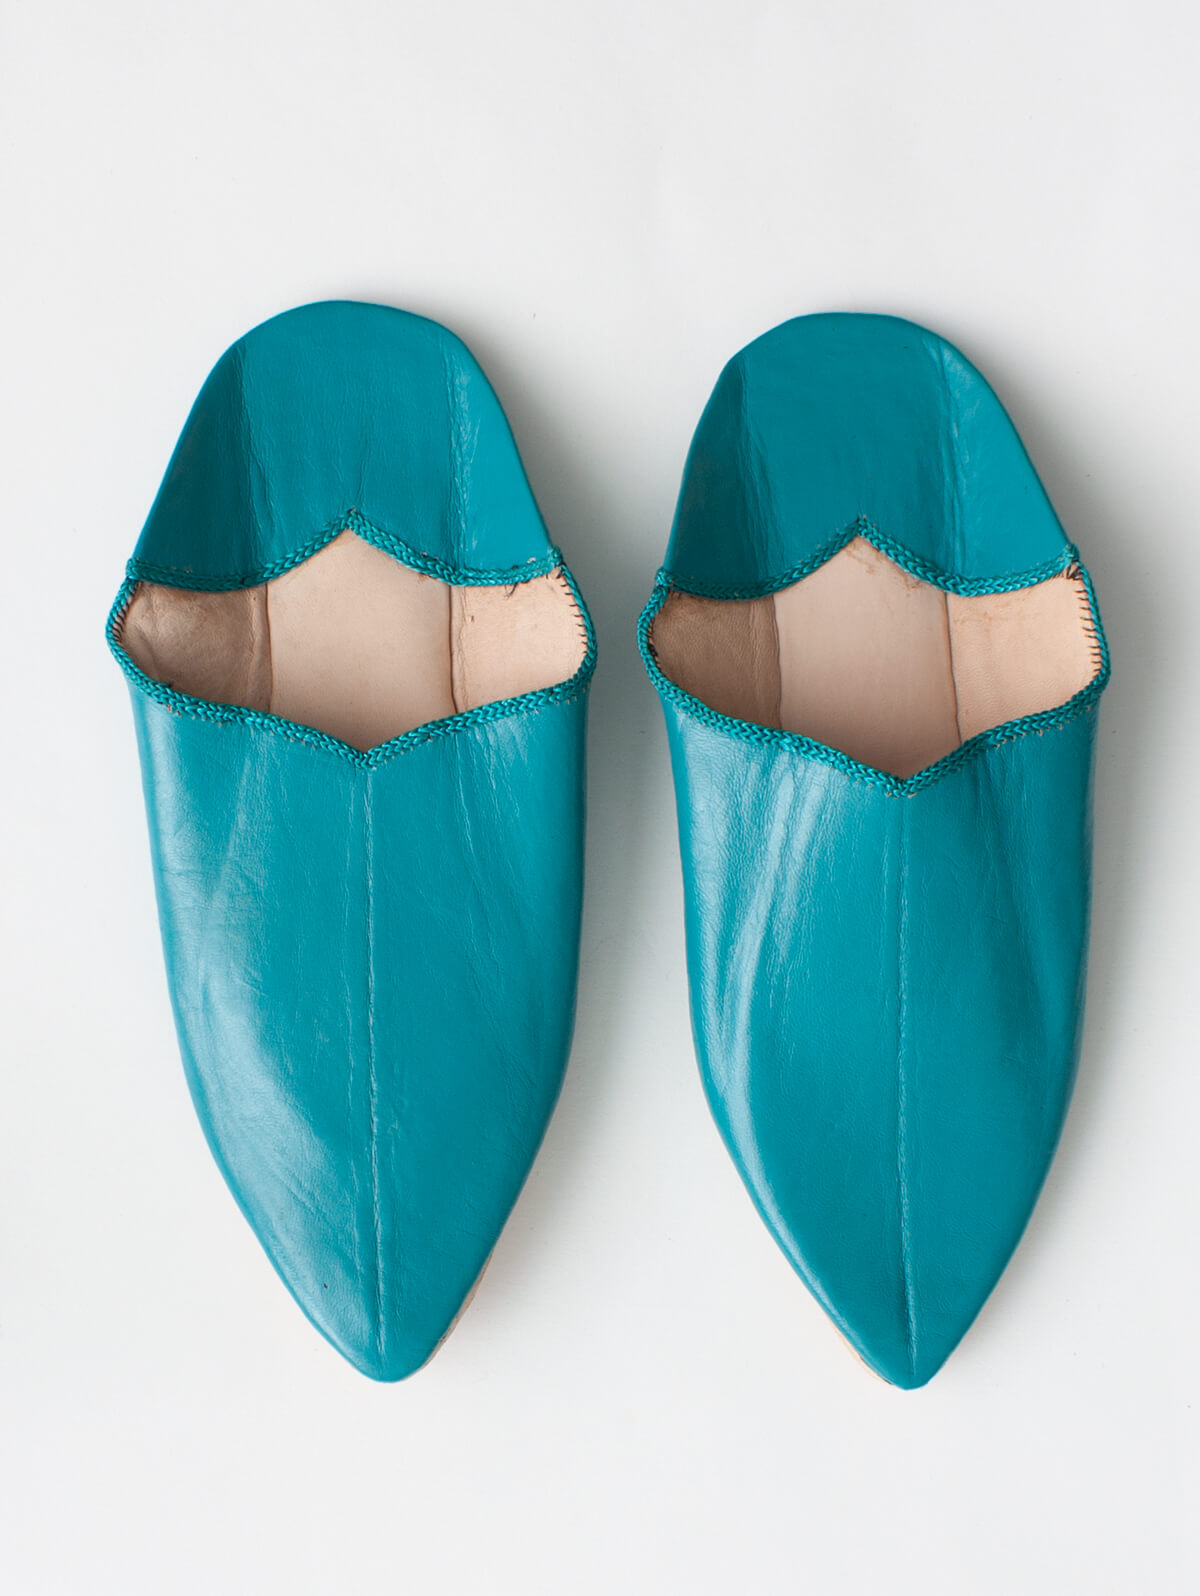 Moroccan Plain Pointed Babouche Slippers, Teal